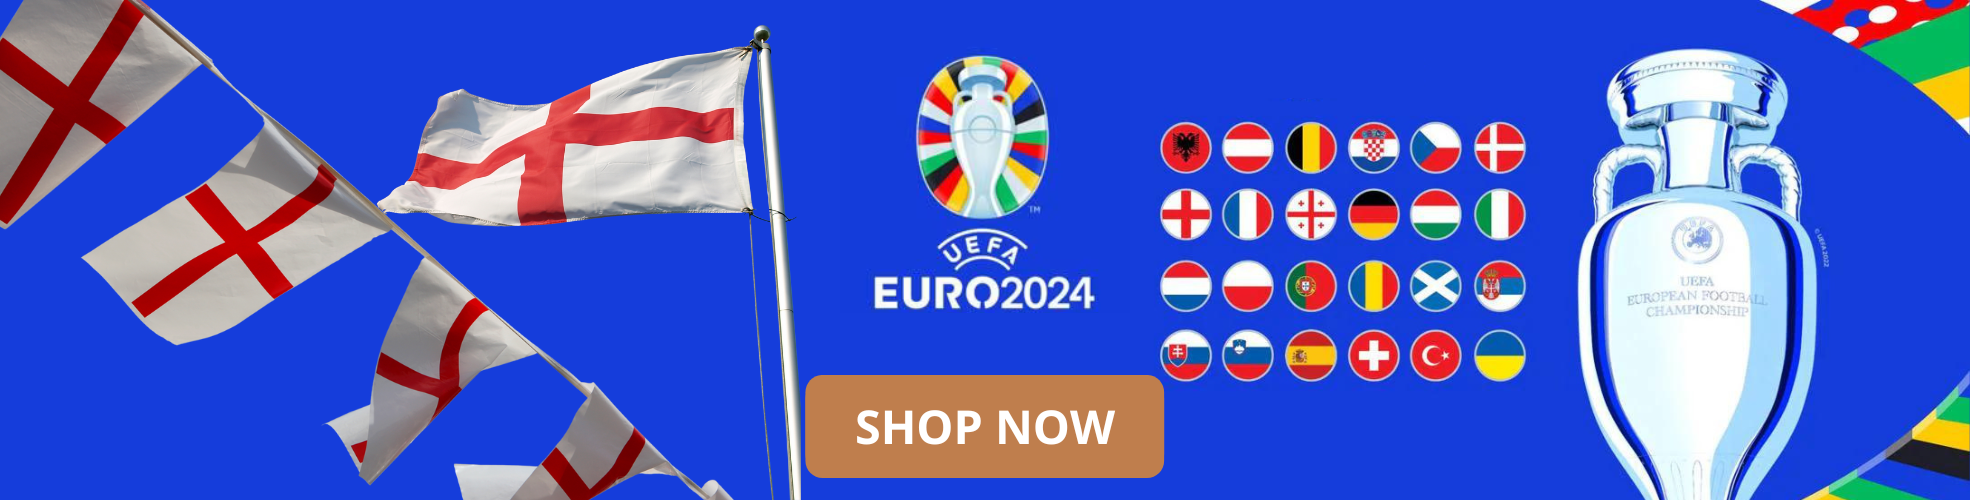 Buy the Football UEFA Euro 2024 Merchandise at wholesale prices. 